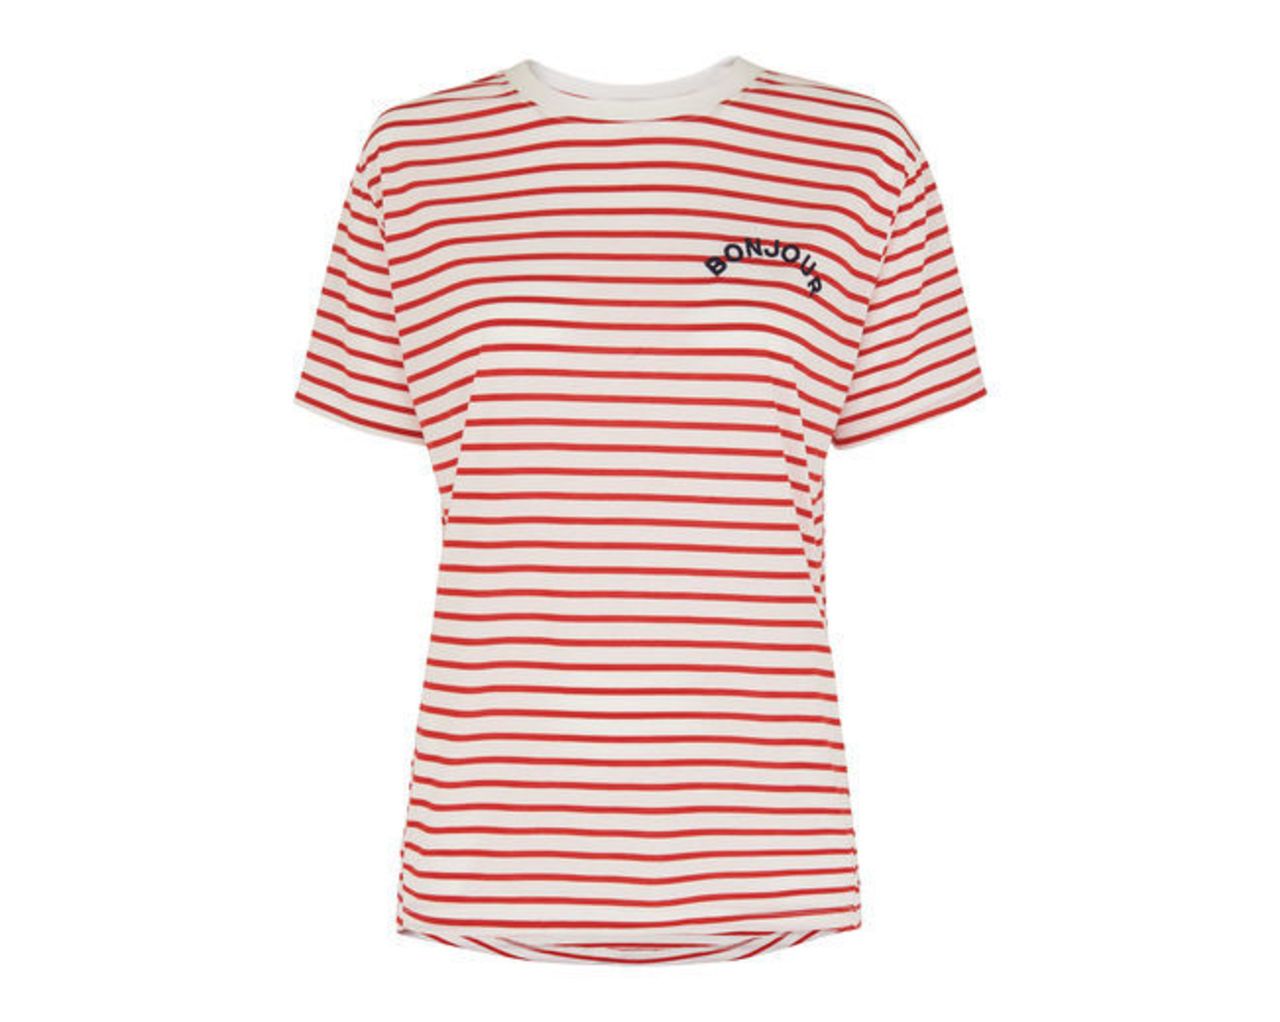 Bonjour Embroidered Logo Tee